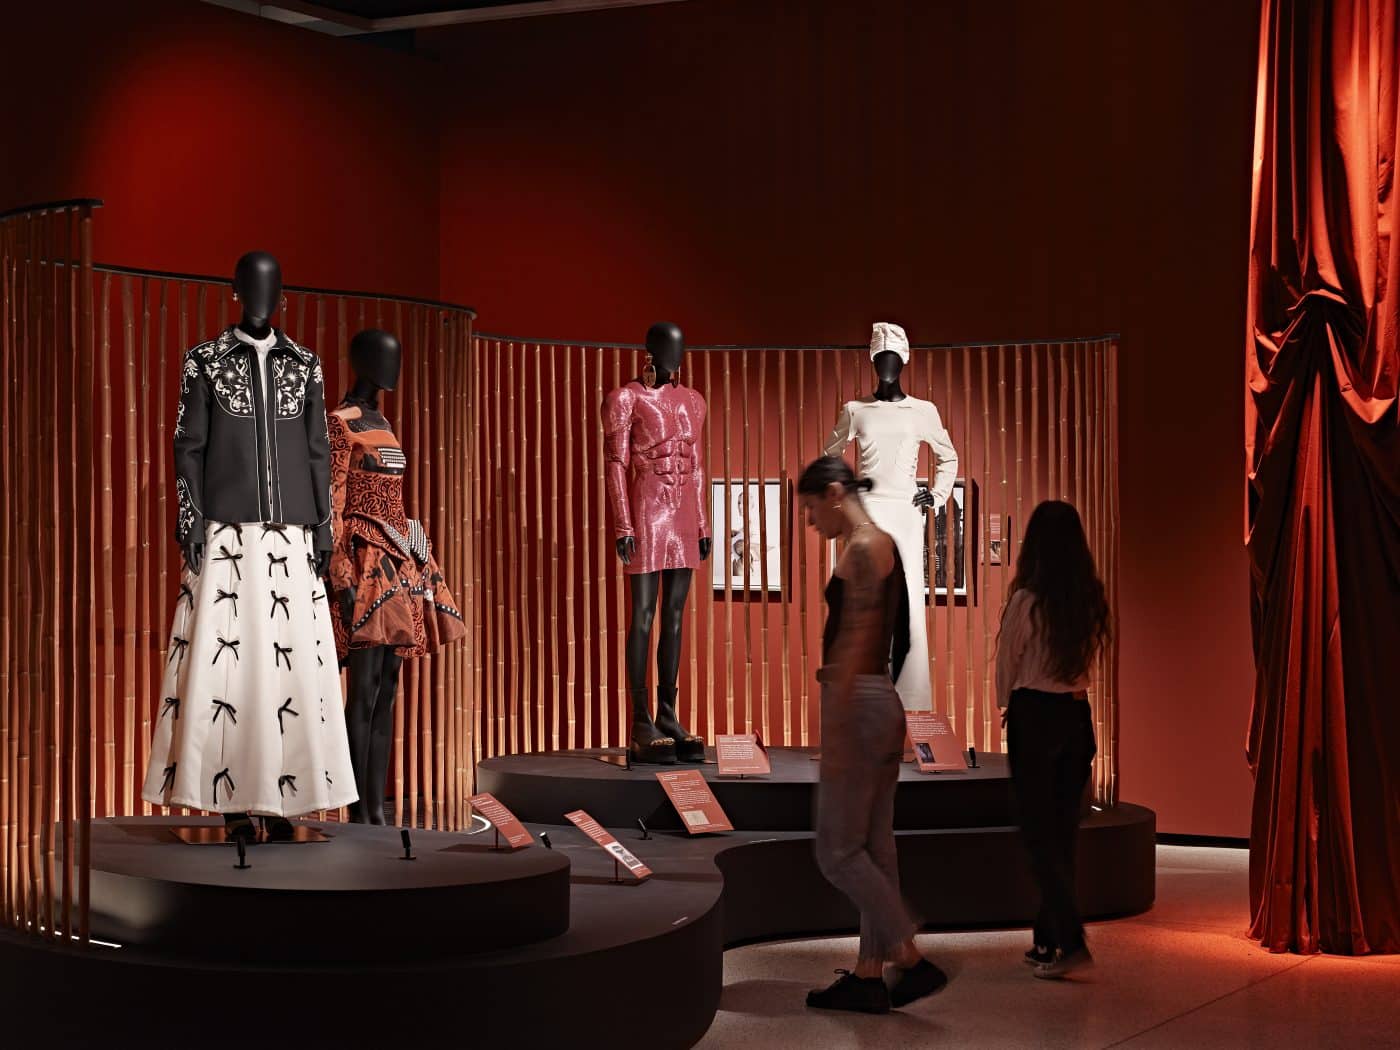 Installation view of the exhibition "Objects of Desire: Surrealism and Design 1924–Today" at the Design Museum in London